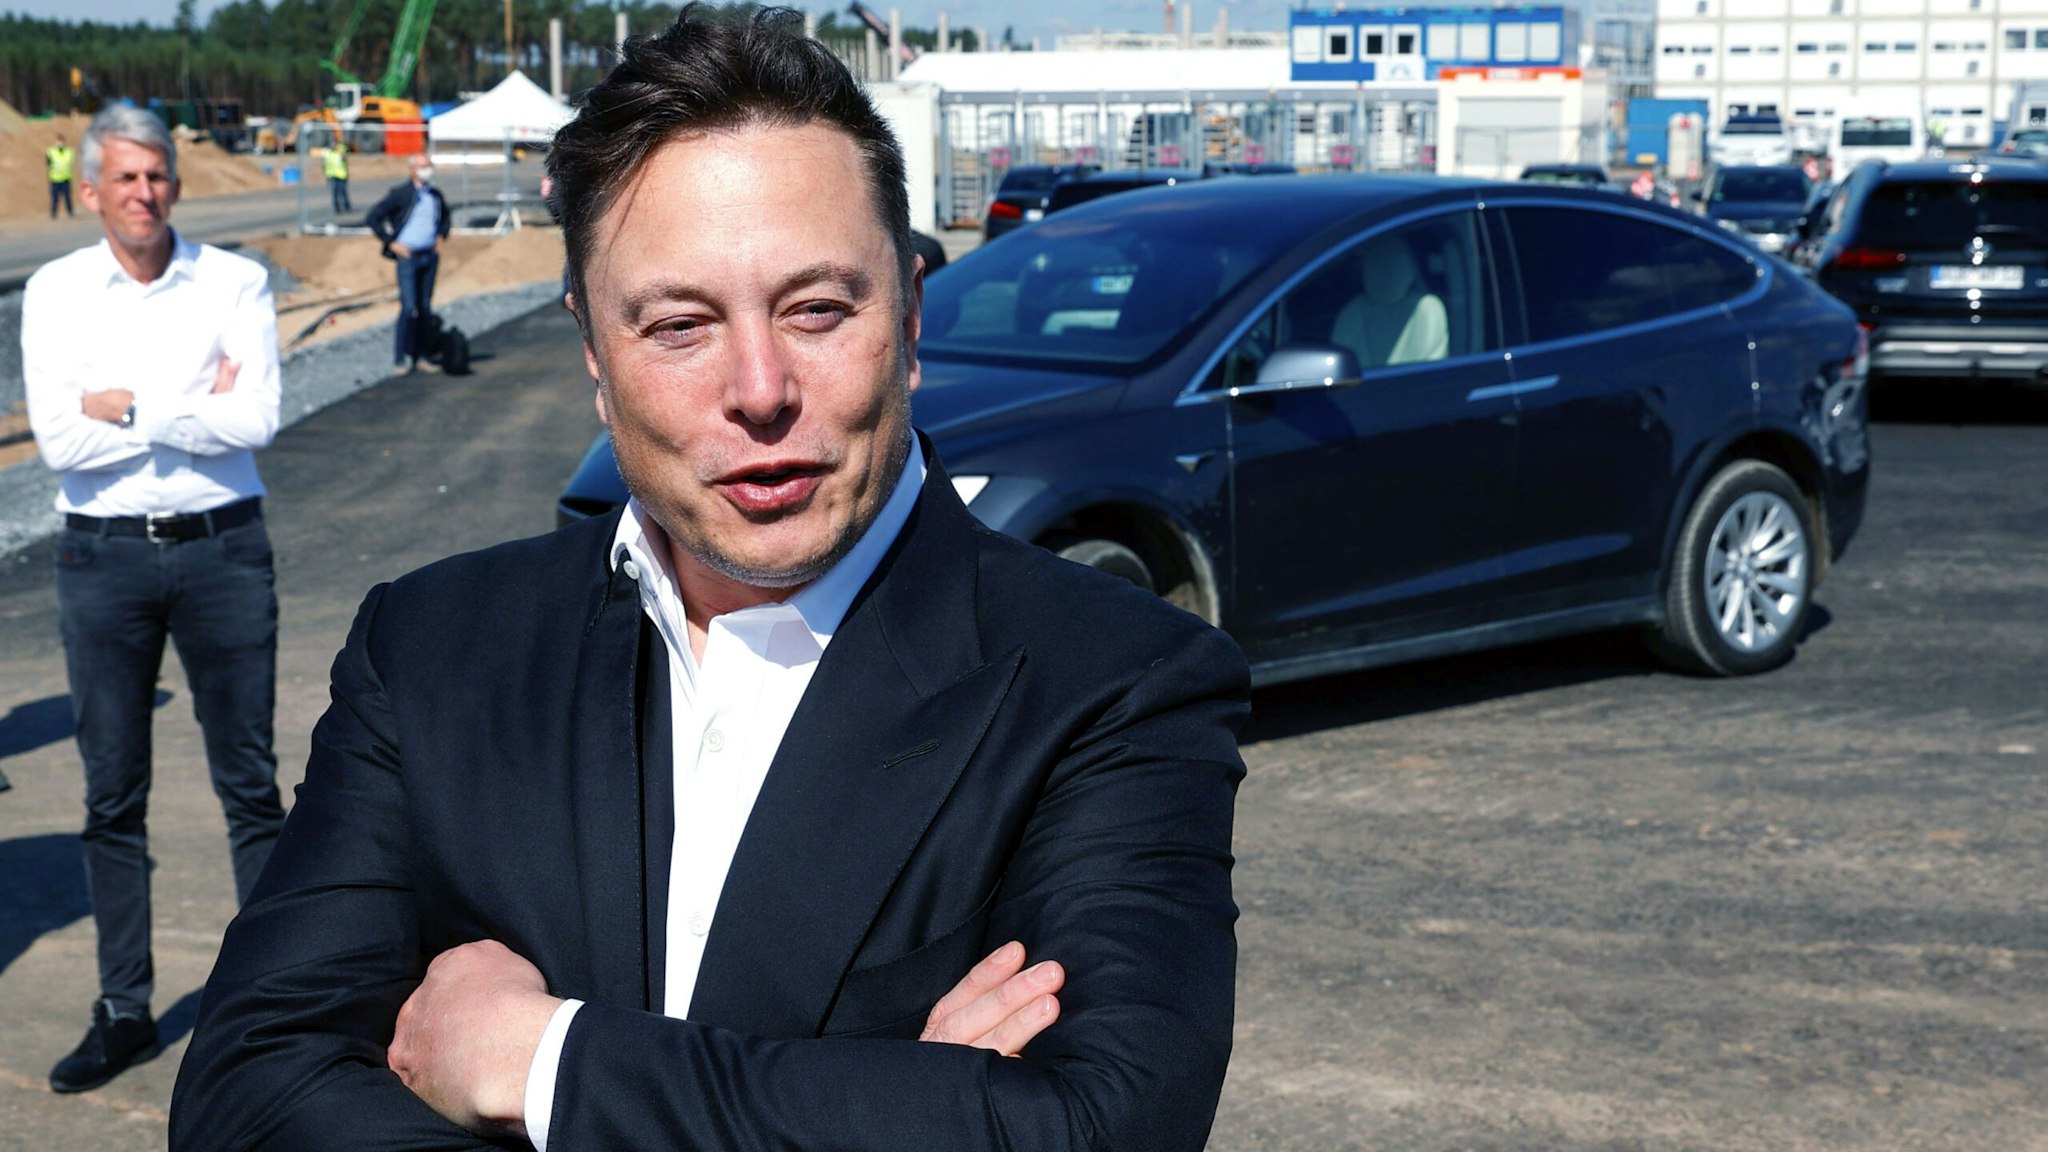 Tesla CEO Elon Musk talks to media as he arrives to visit the construction site of the future US electric car giant Tesla, on September 03, 2020 in Gruenheide near Berlin. - Tesla builds a compound at the site in Gruenheide in Brandenburg for its first European "Gigafactory" near Berlin.